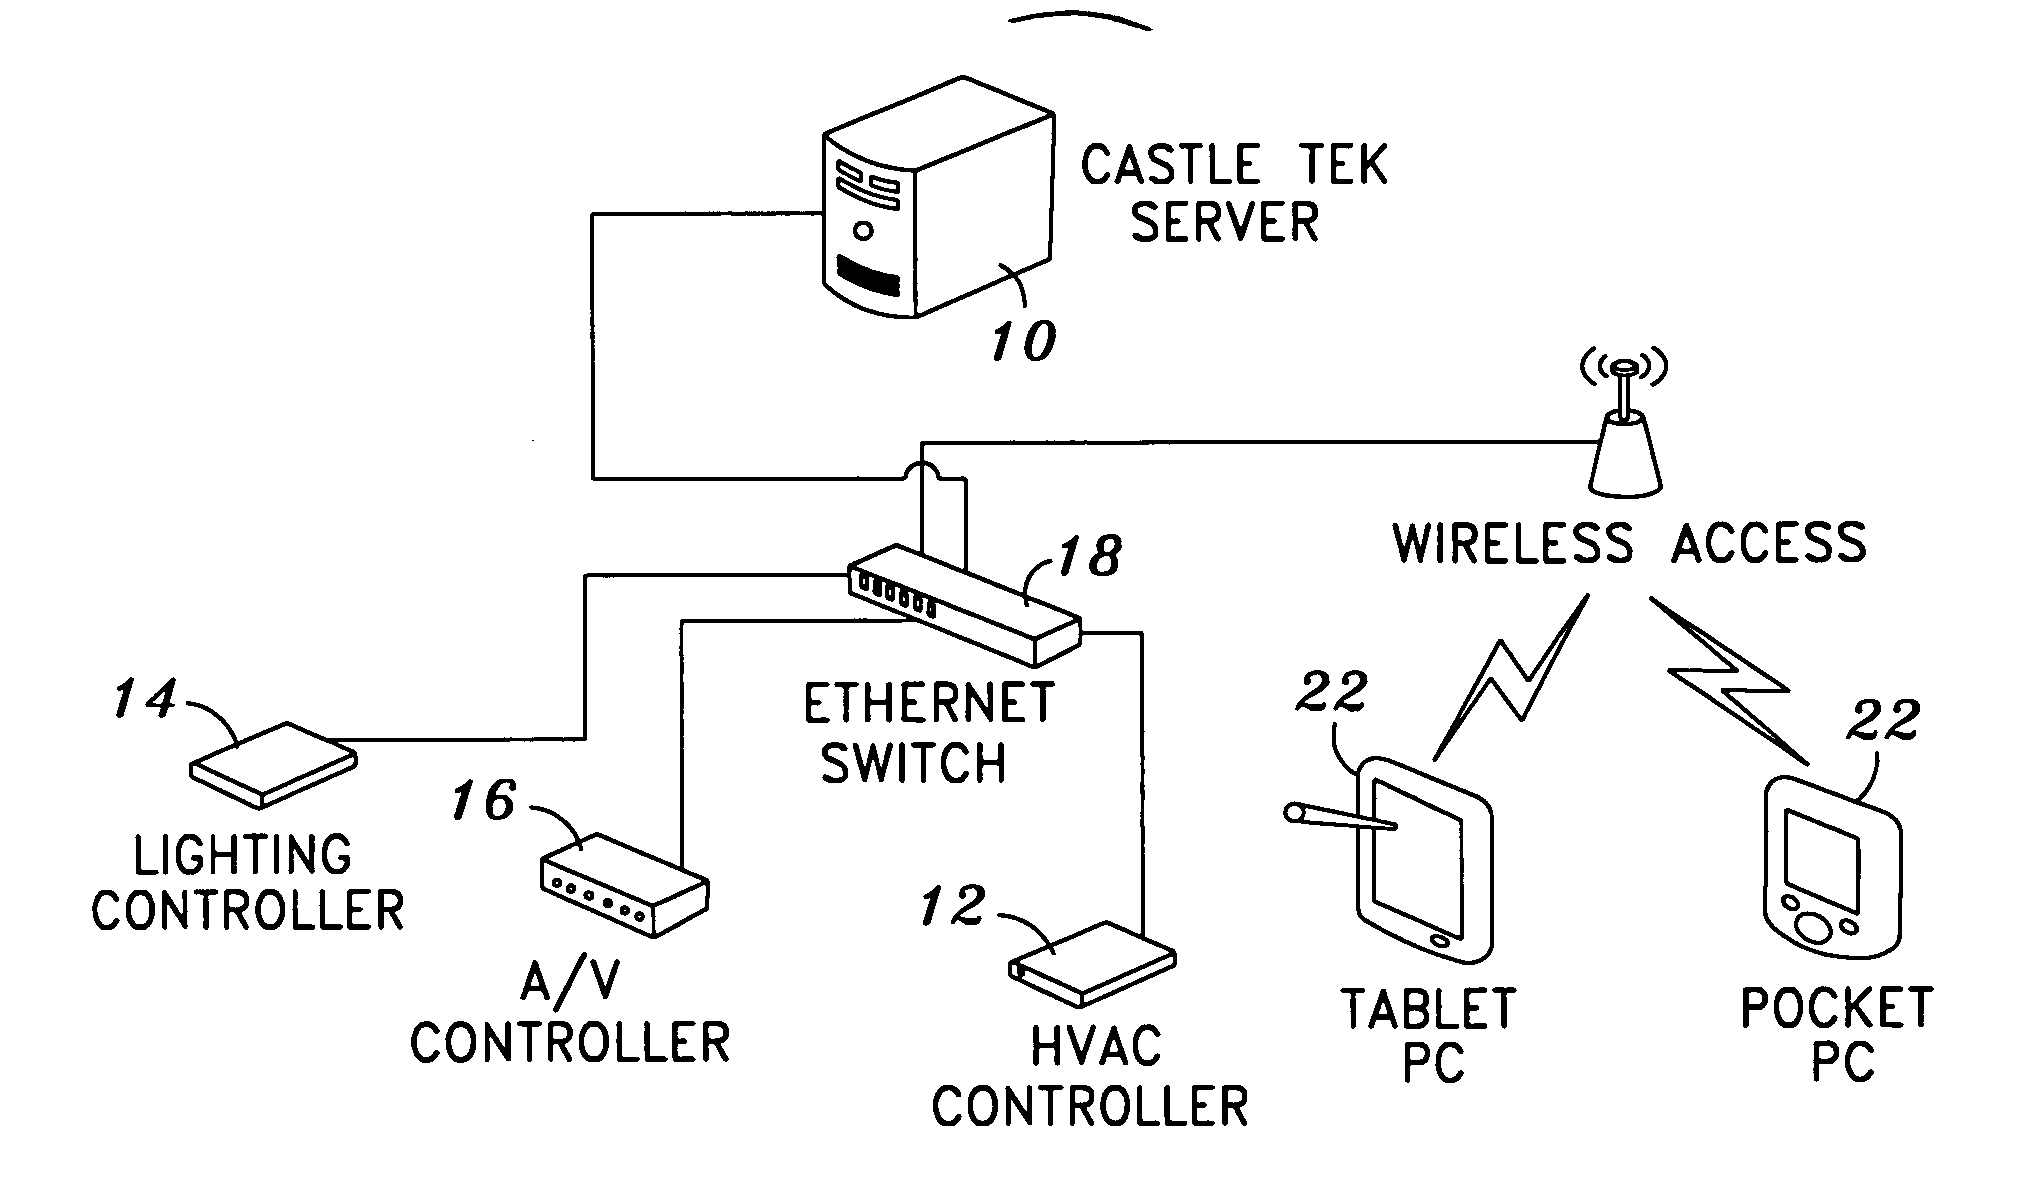 Network solution for integrated control of electronic devices between different sites